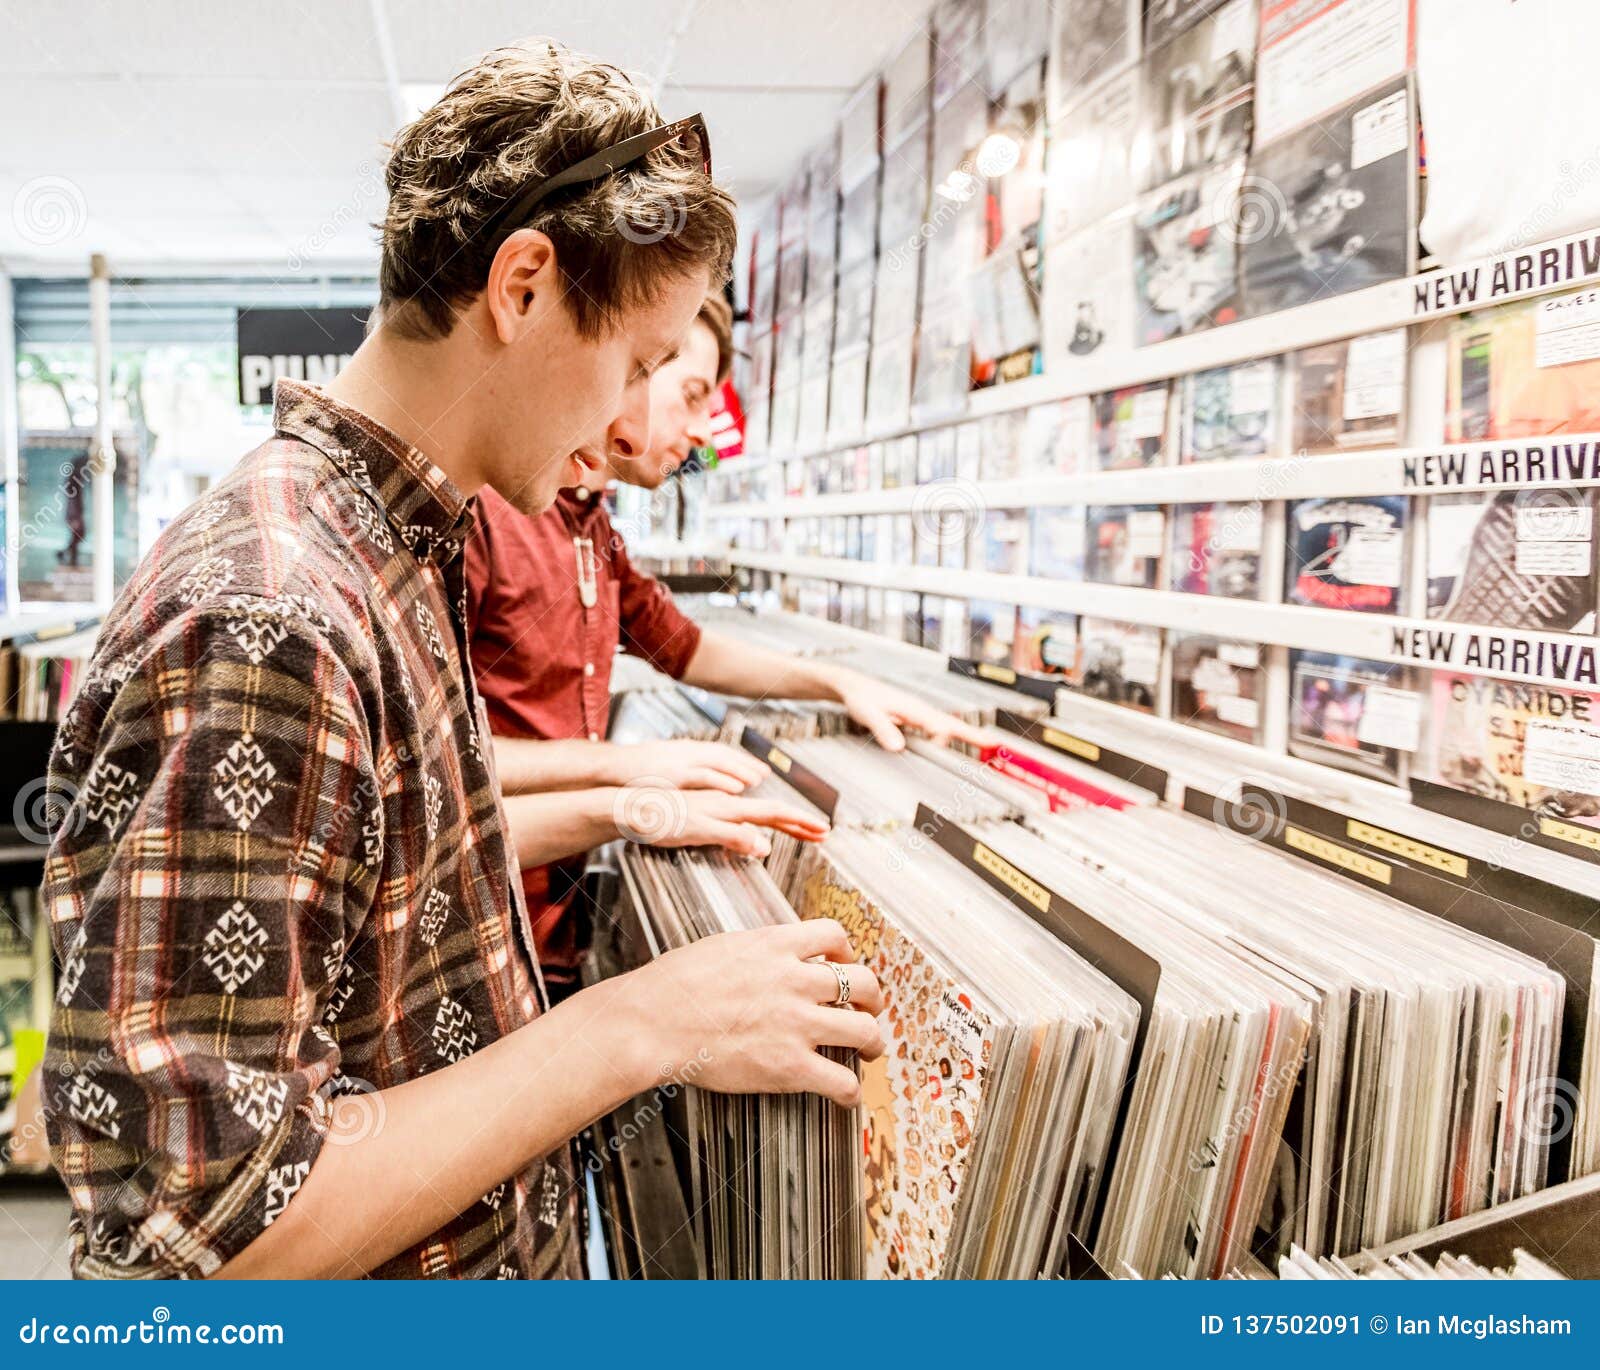 wenselijk vasthouden Spijsverteringsorgaan A Young Man Looking at Vinyl Records in a Store or Shop. Editorial Photo -  Image of smiling, hipster: 137502091